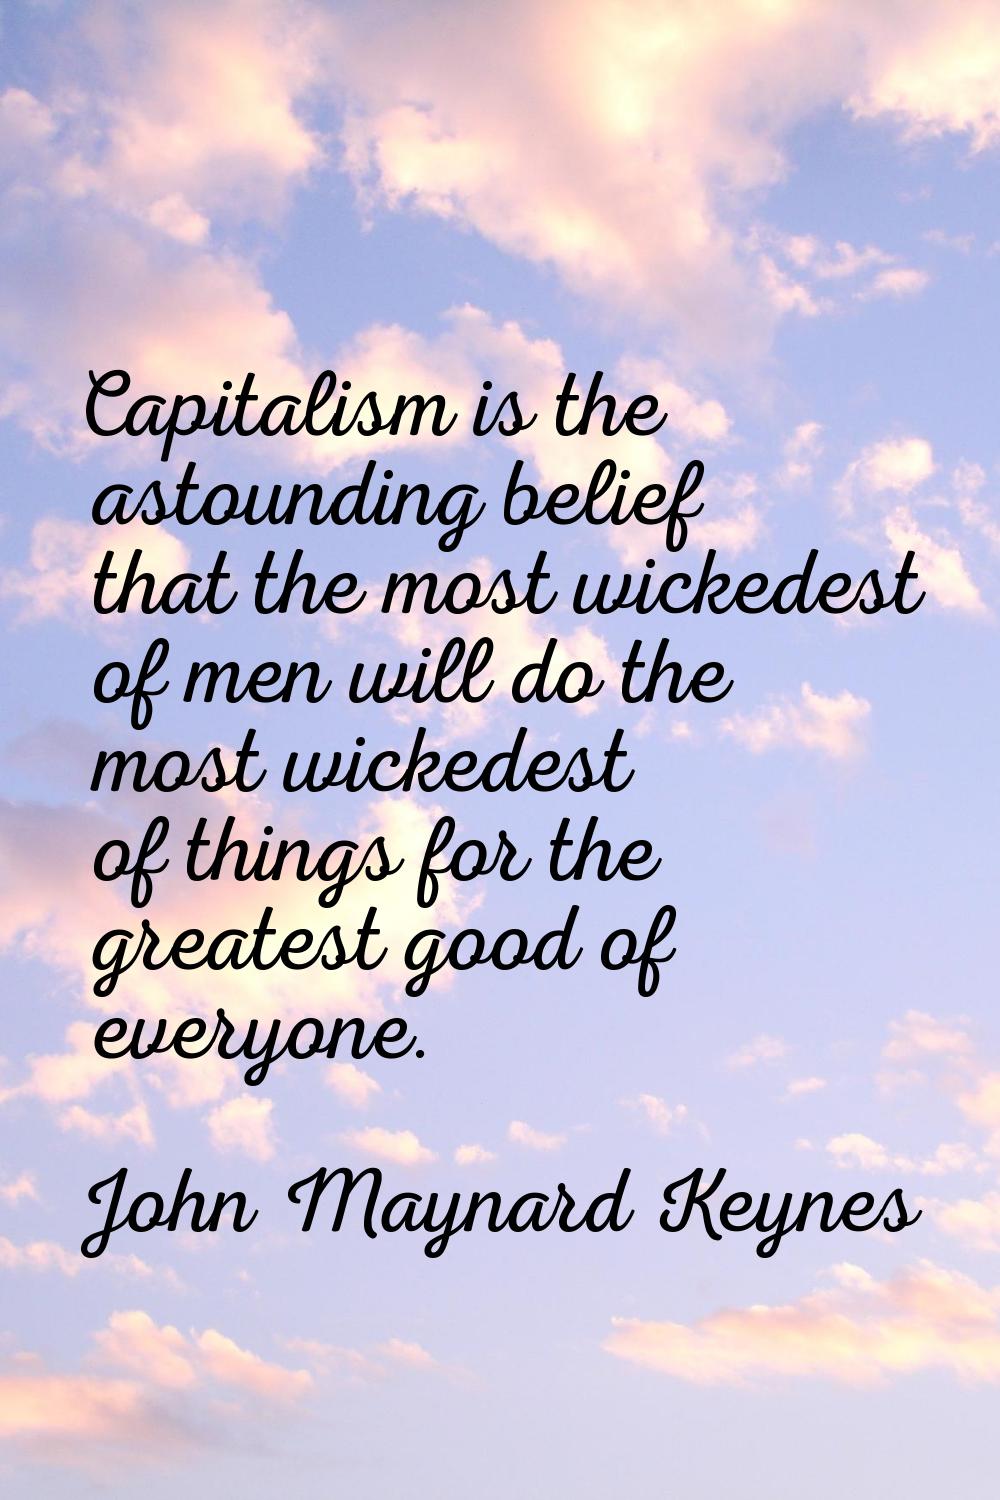 Capitalism is the astounding belief that the most wickedest of men will do the most wickedest of th